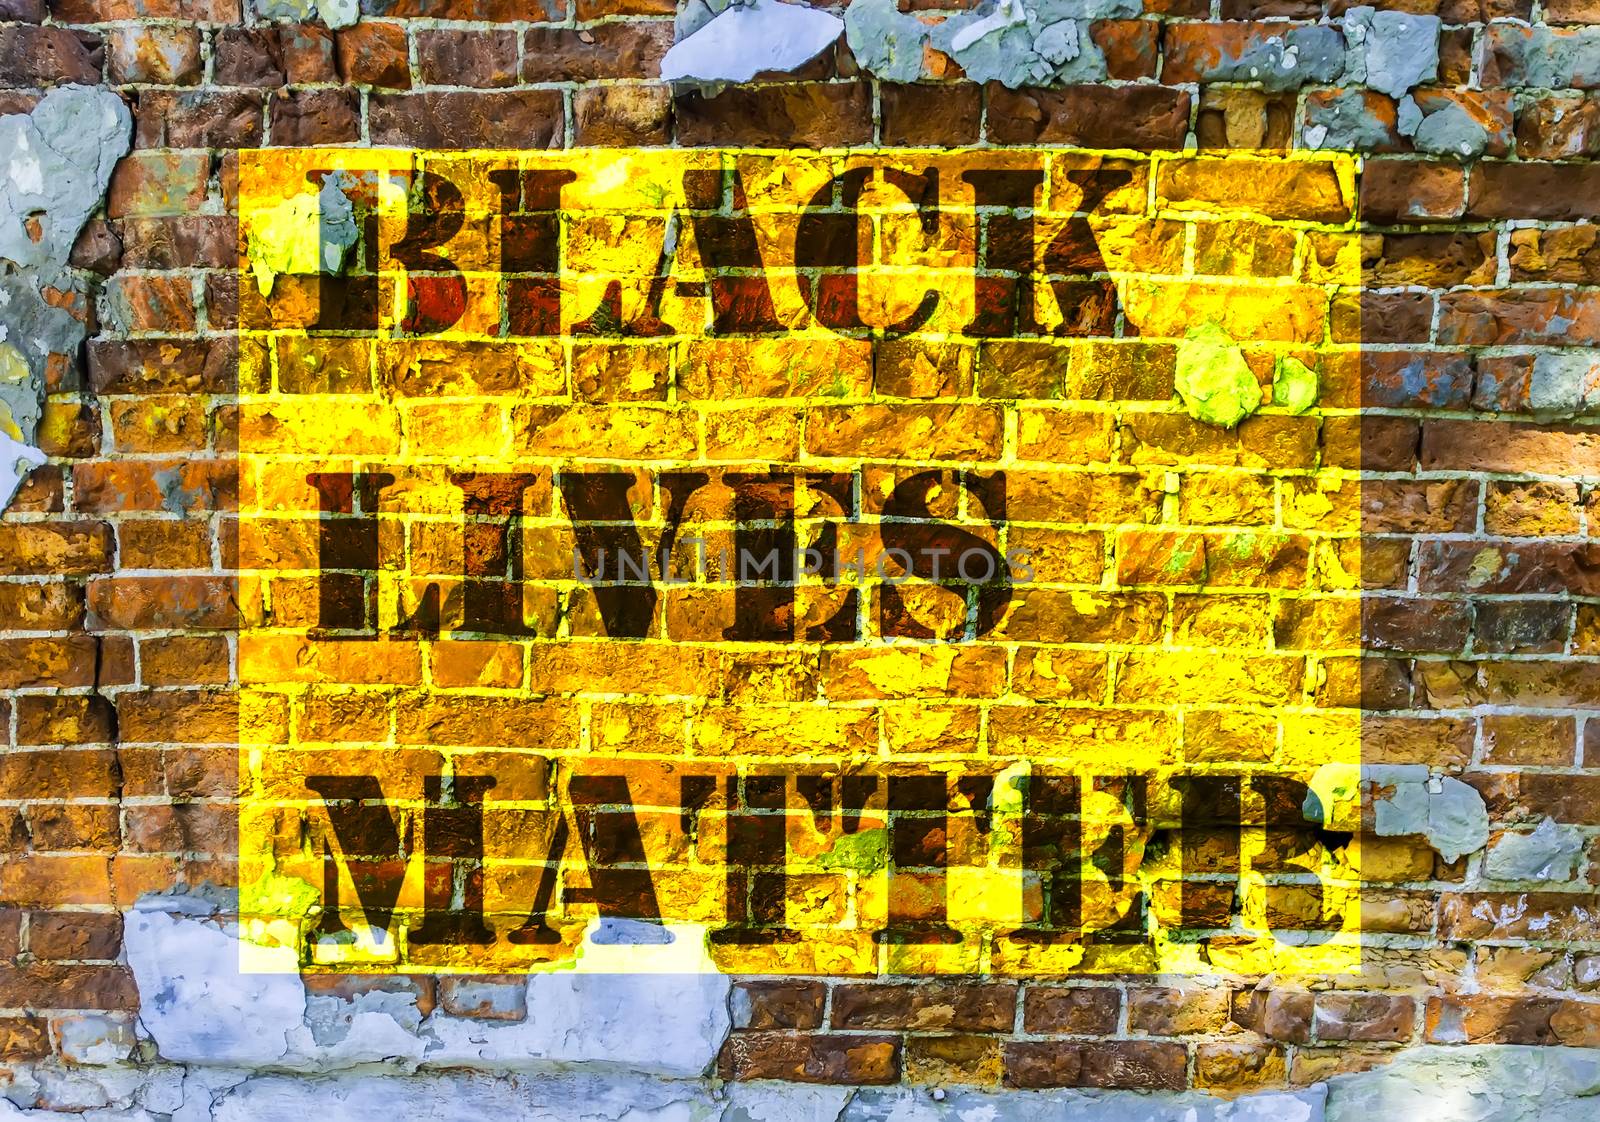 Black Lives Matter slogan anti Black racism african American stencil in brick wall background old blocks of stonework color architecture vintage